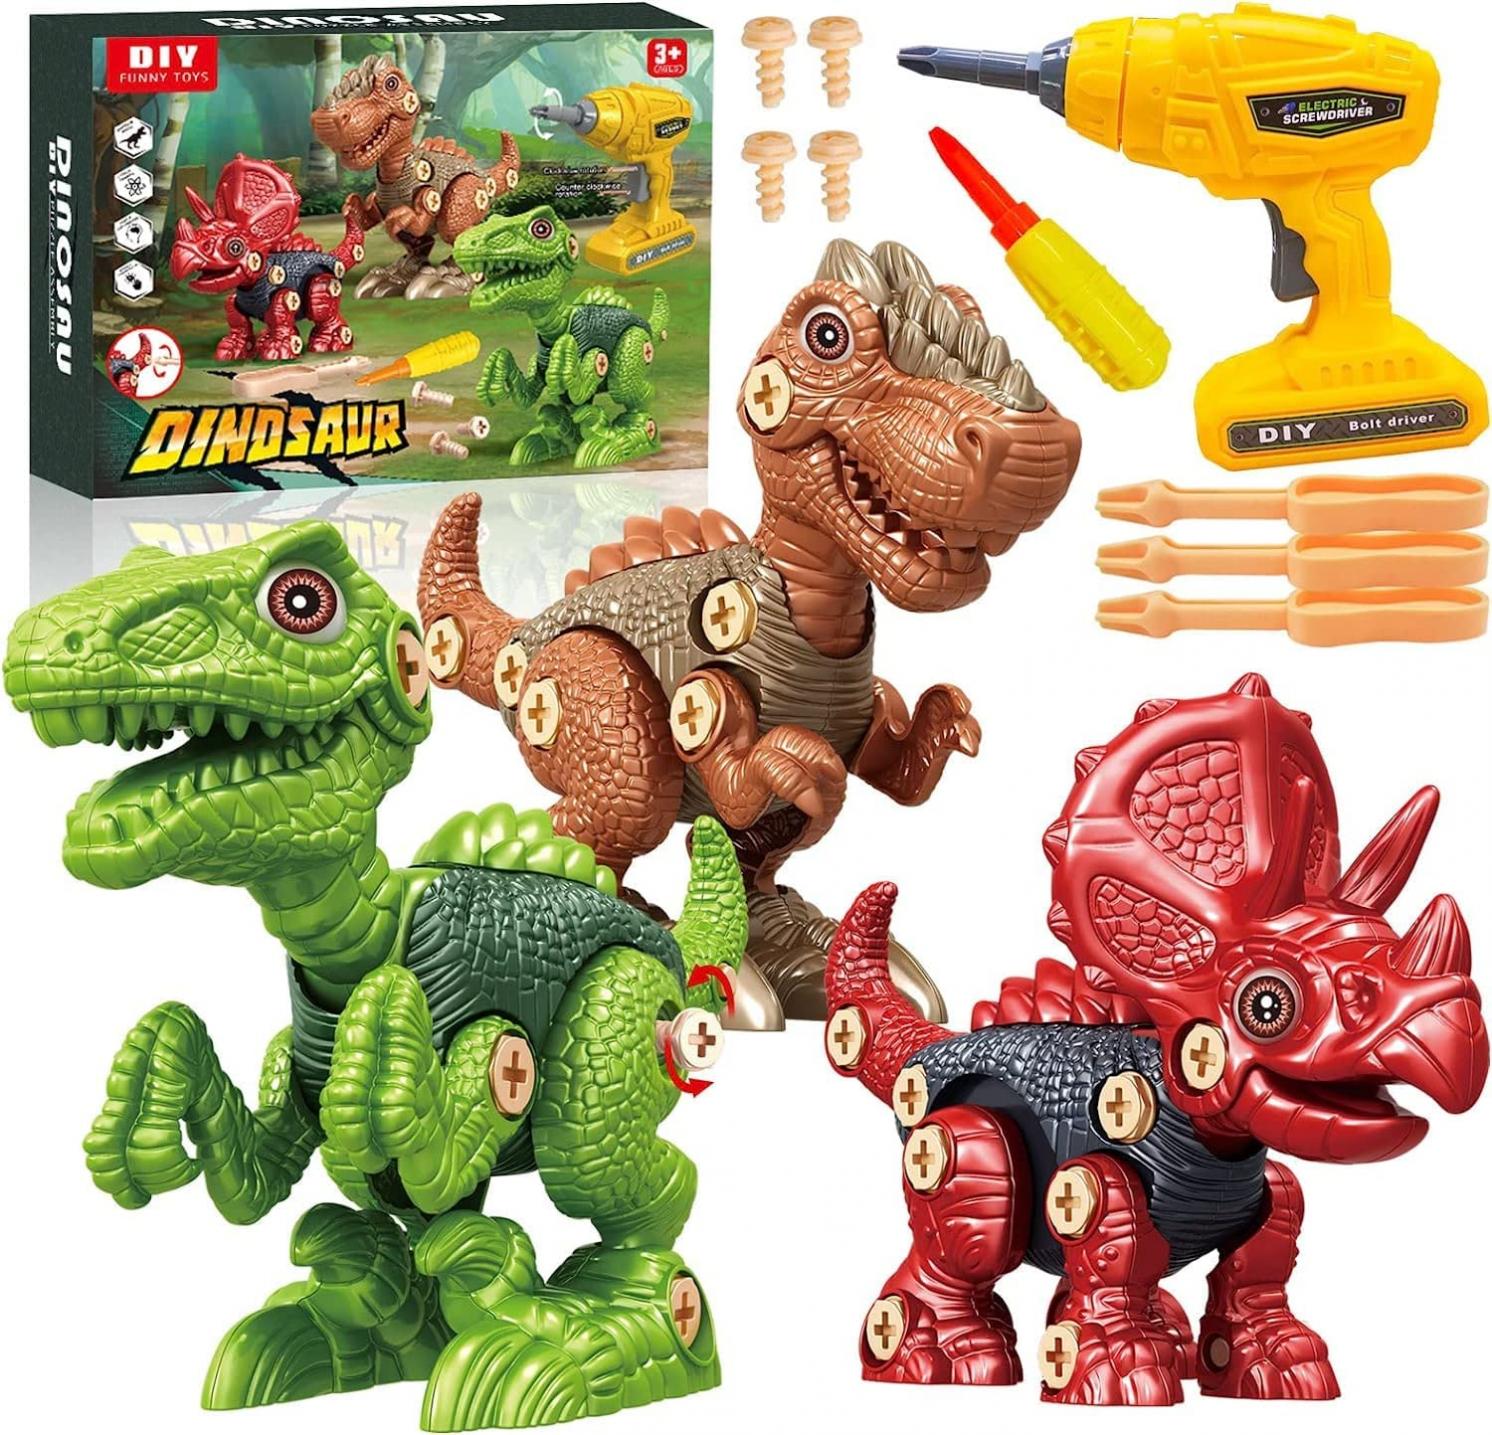 Take Apart Dinosaur Toys for Kids 3-5 -7 Christmas Stem Dinosaur Toy Building Kit Construction Sets with Electric Drill Birthday Gifts for Boys Girls Toddlers Age 3 4 5 6 7 8 Year Old[Upgrade]